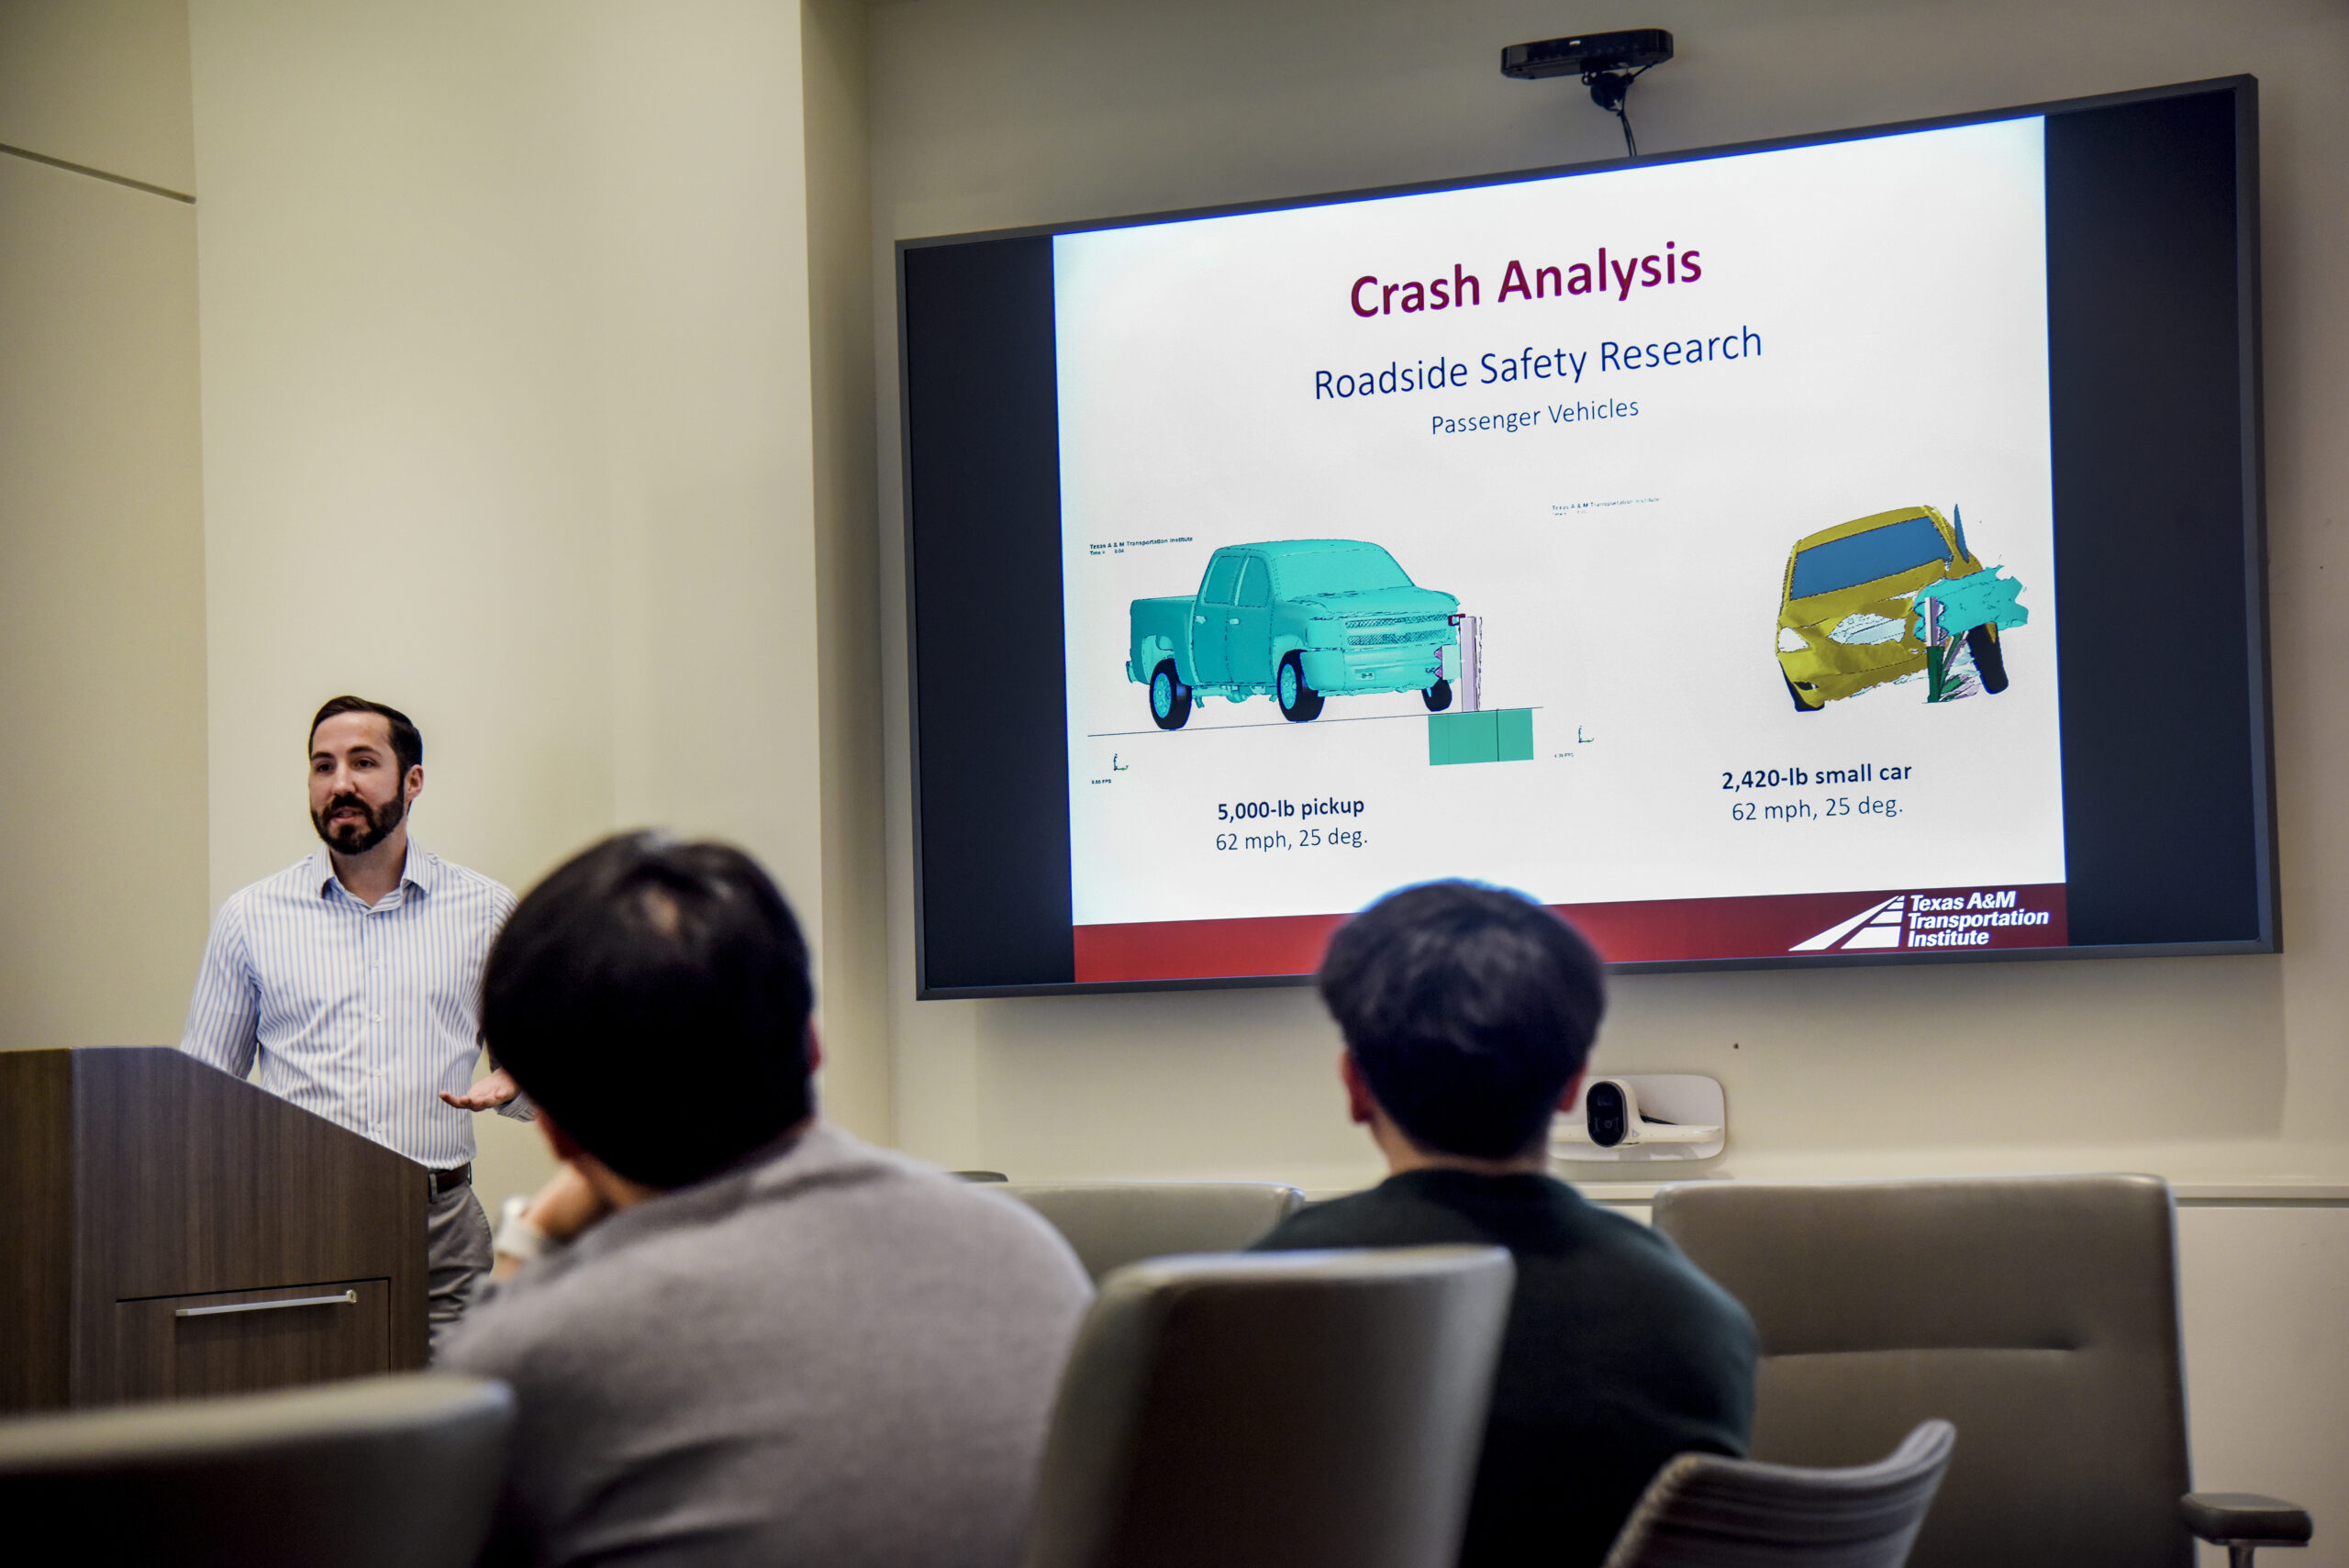 Nathan Schulz stands at the podium presenting information about crash analysis to visitors from the KAIST Program.